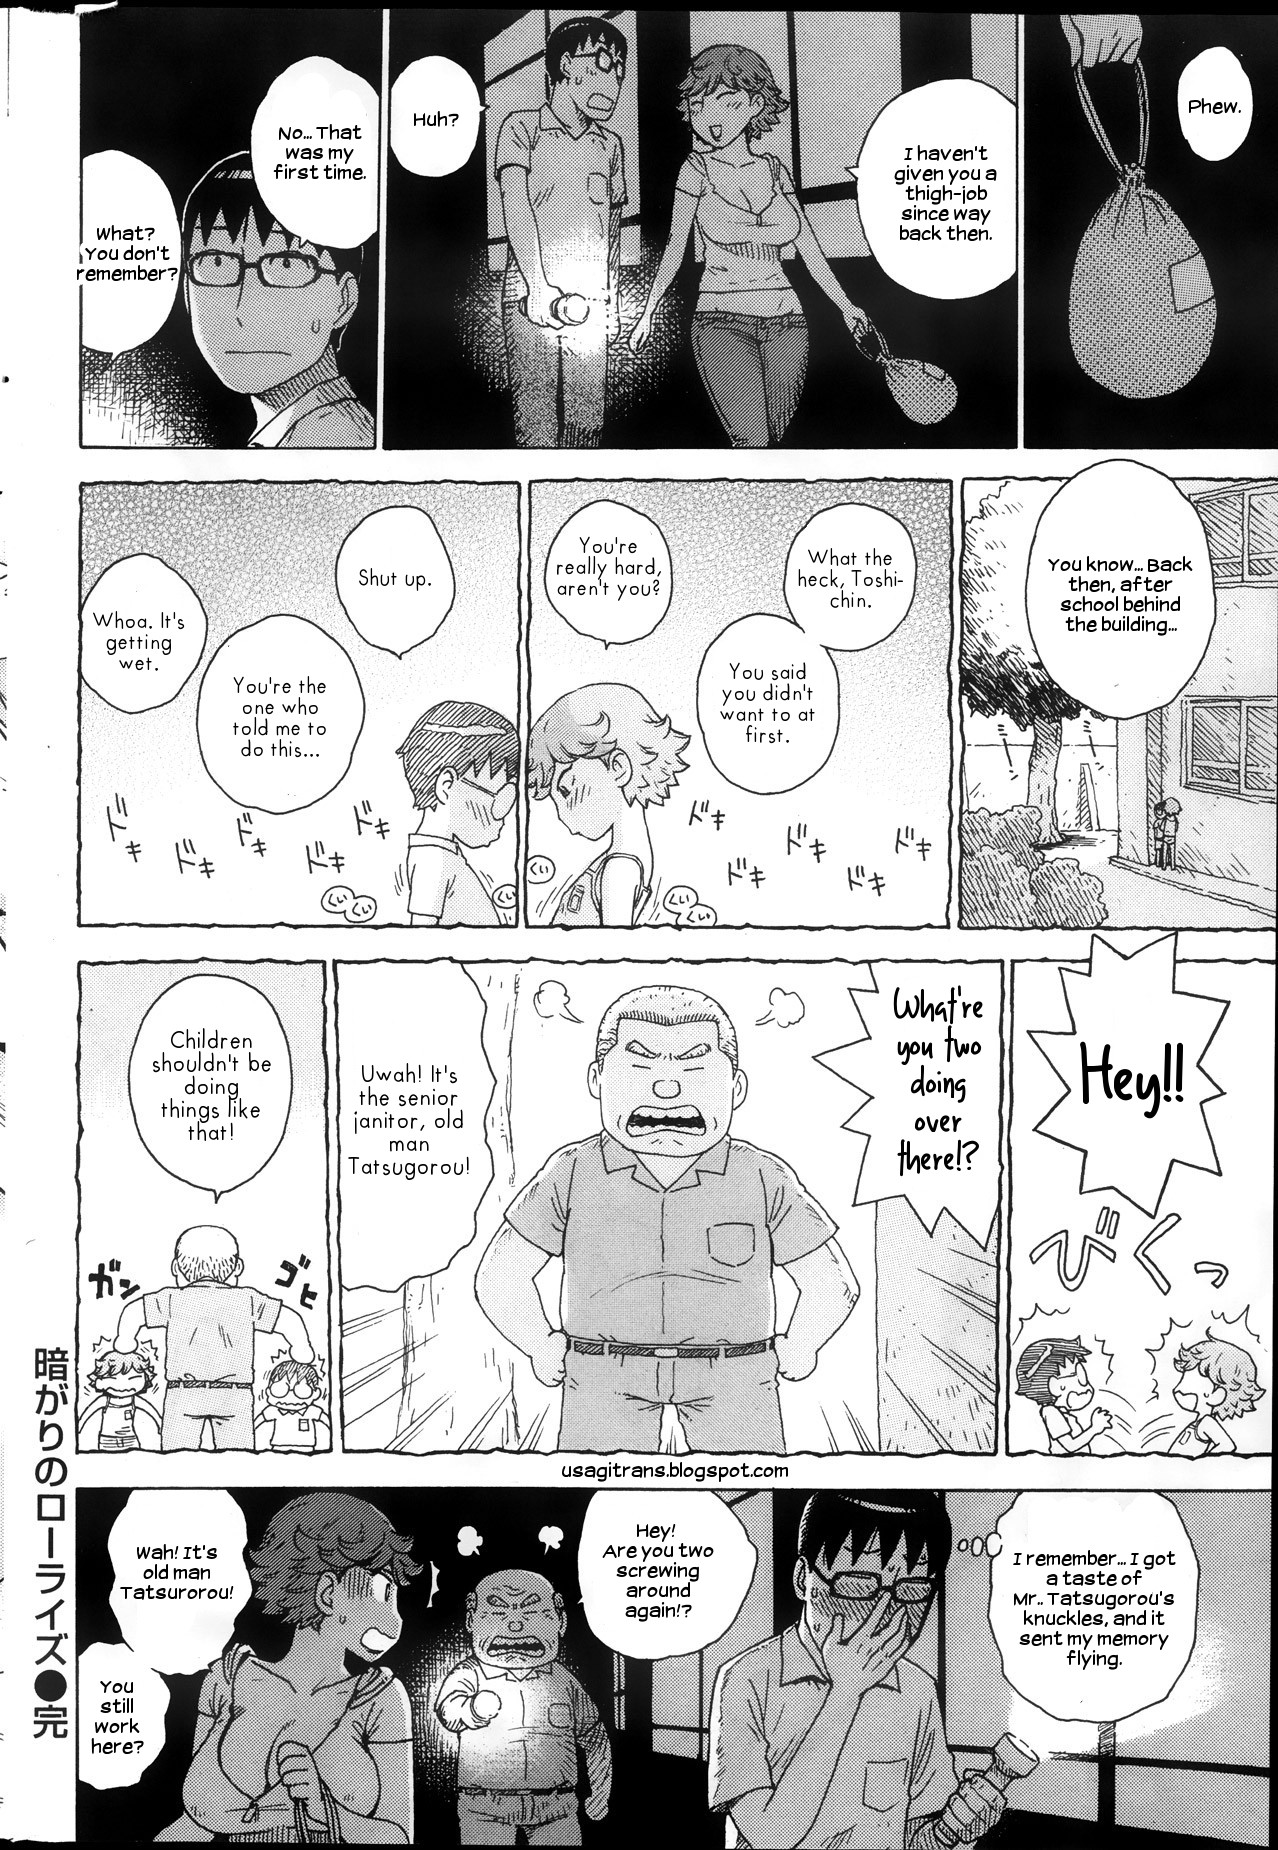 [Karma Tatsurou] Low-Rise in the Darkness [English] [UsagiTrans] page 16 full